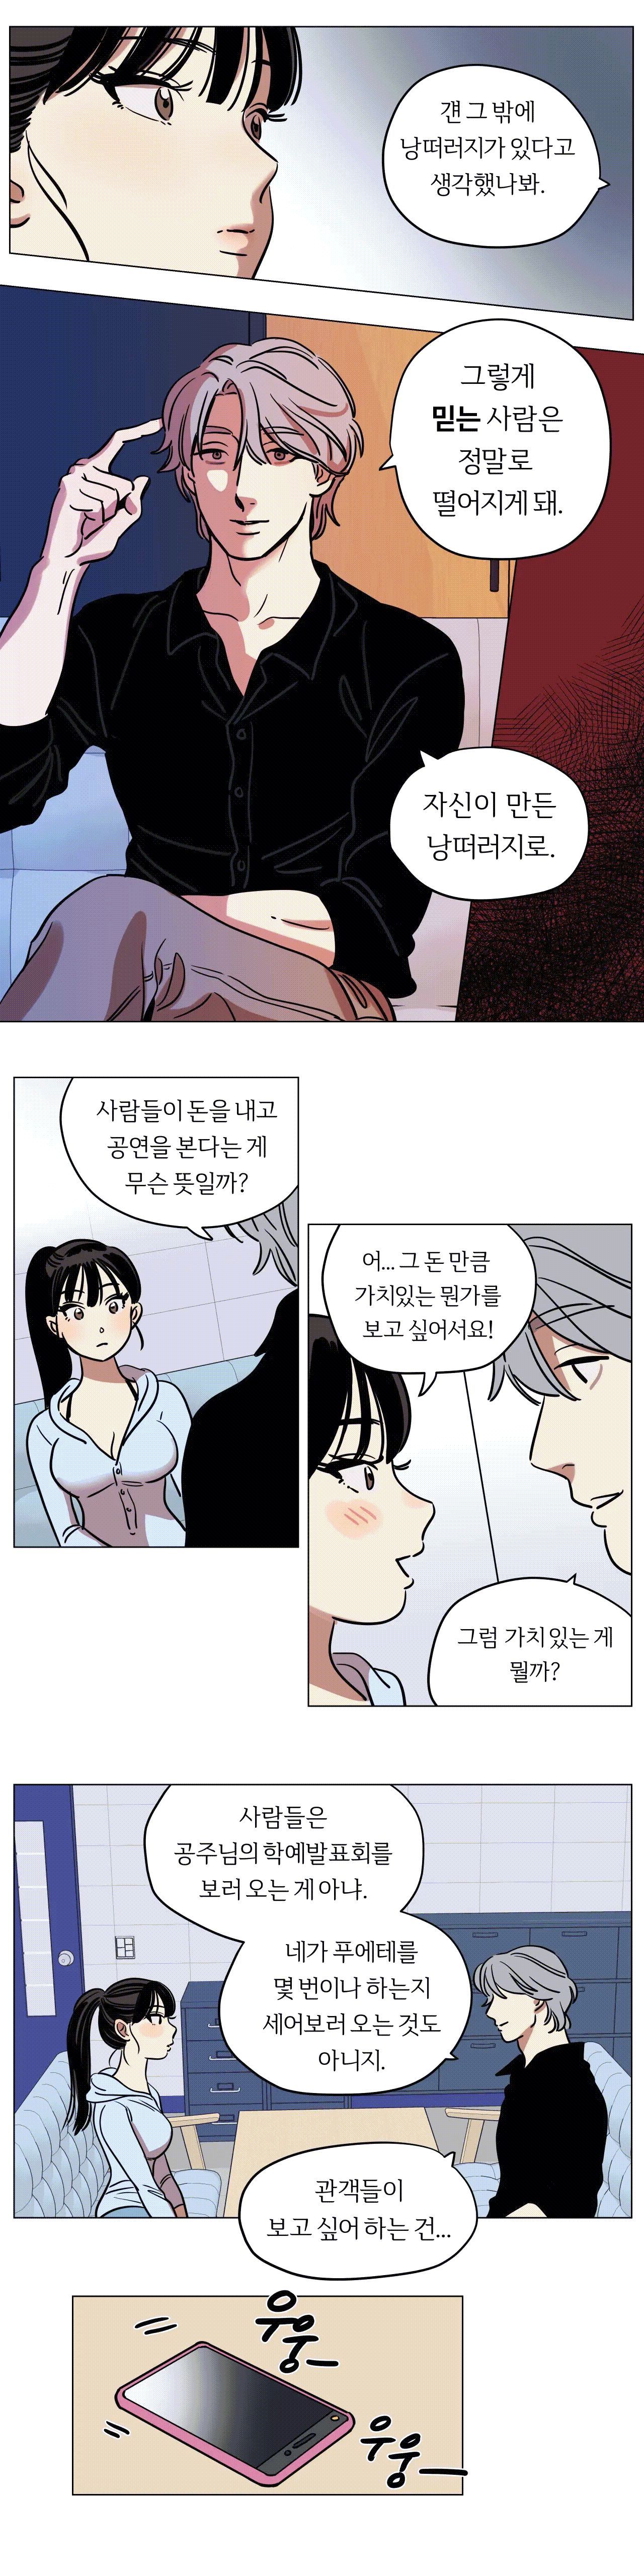 Snowman Raw - Chapter 9 Page 4